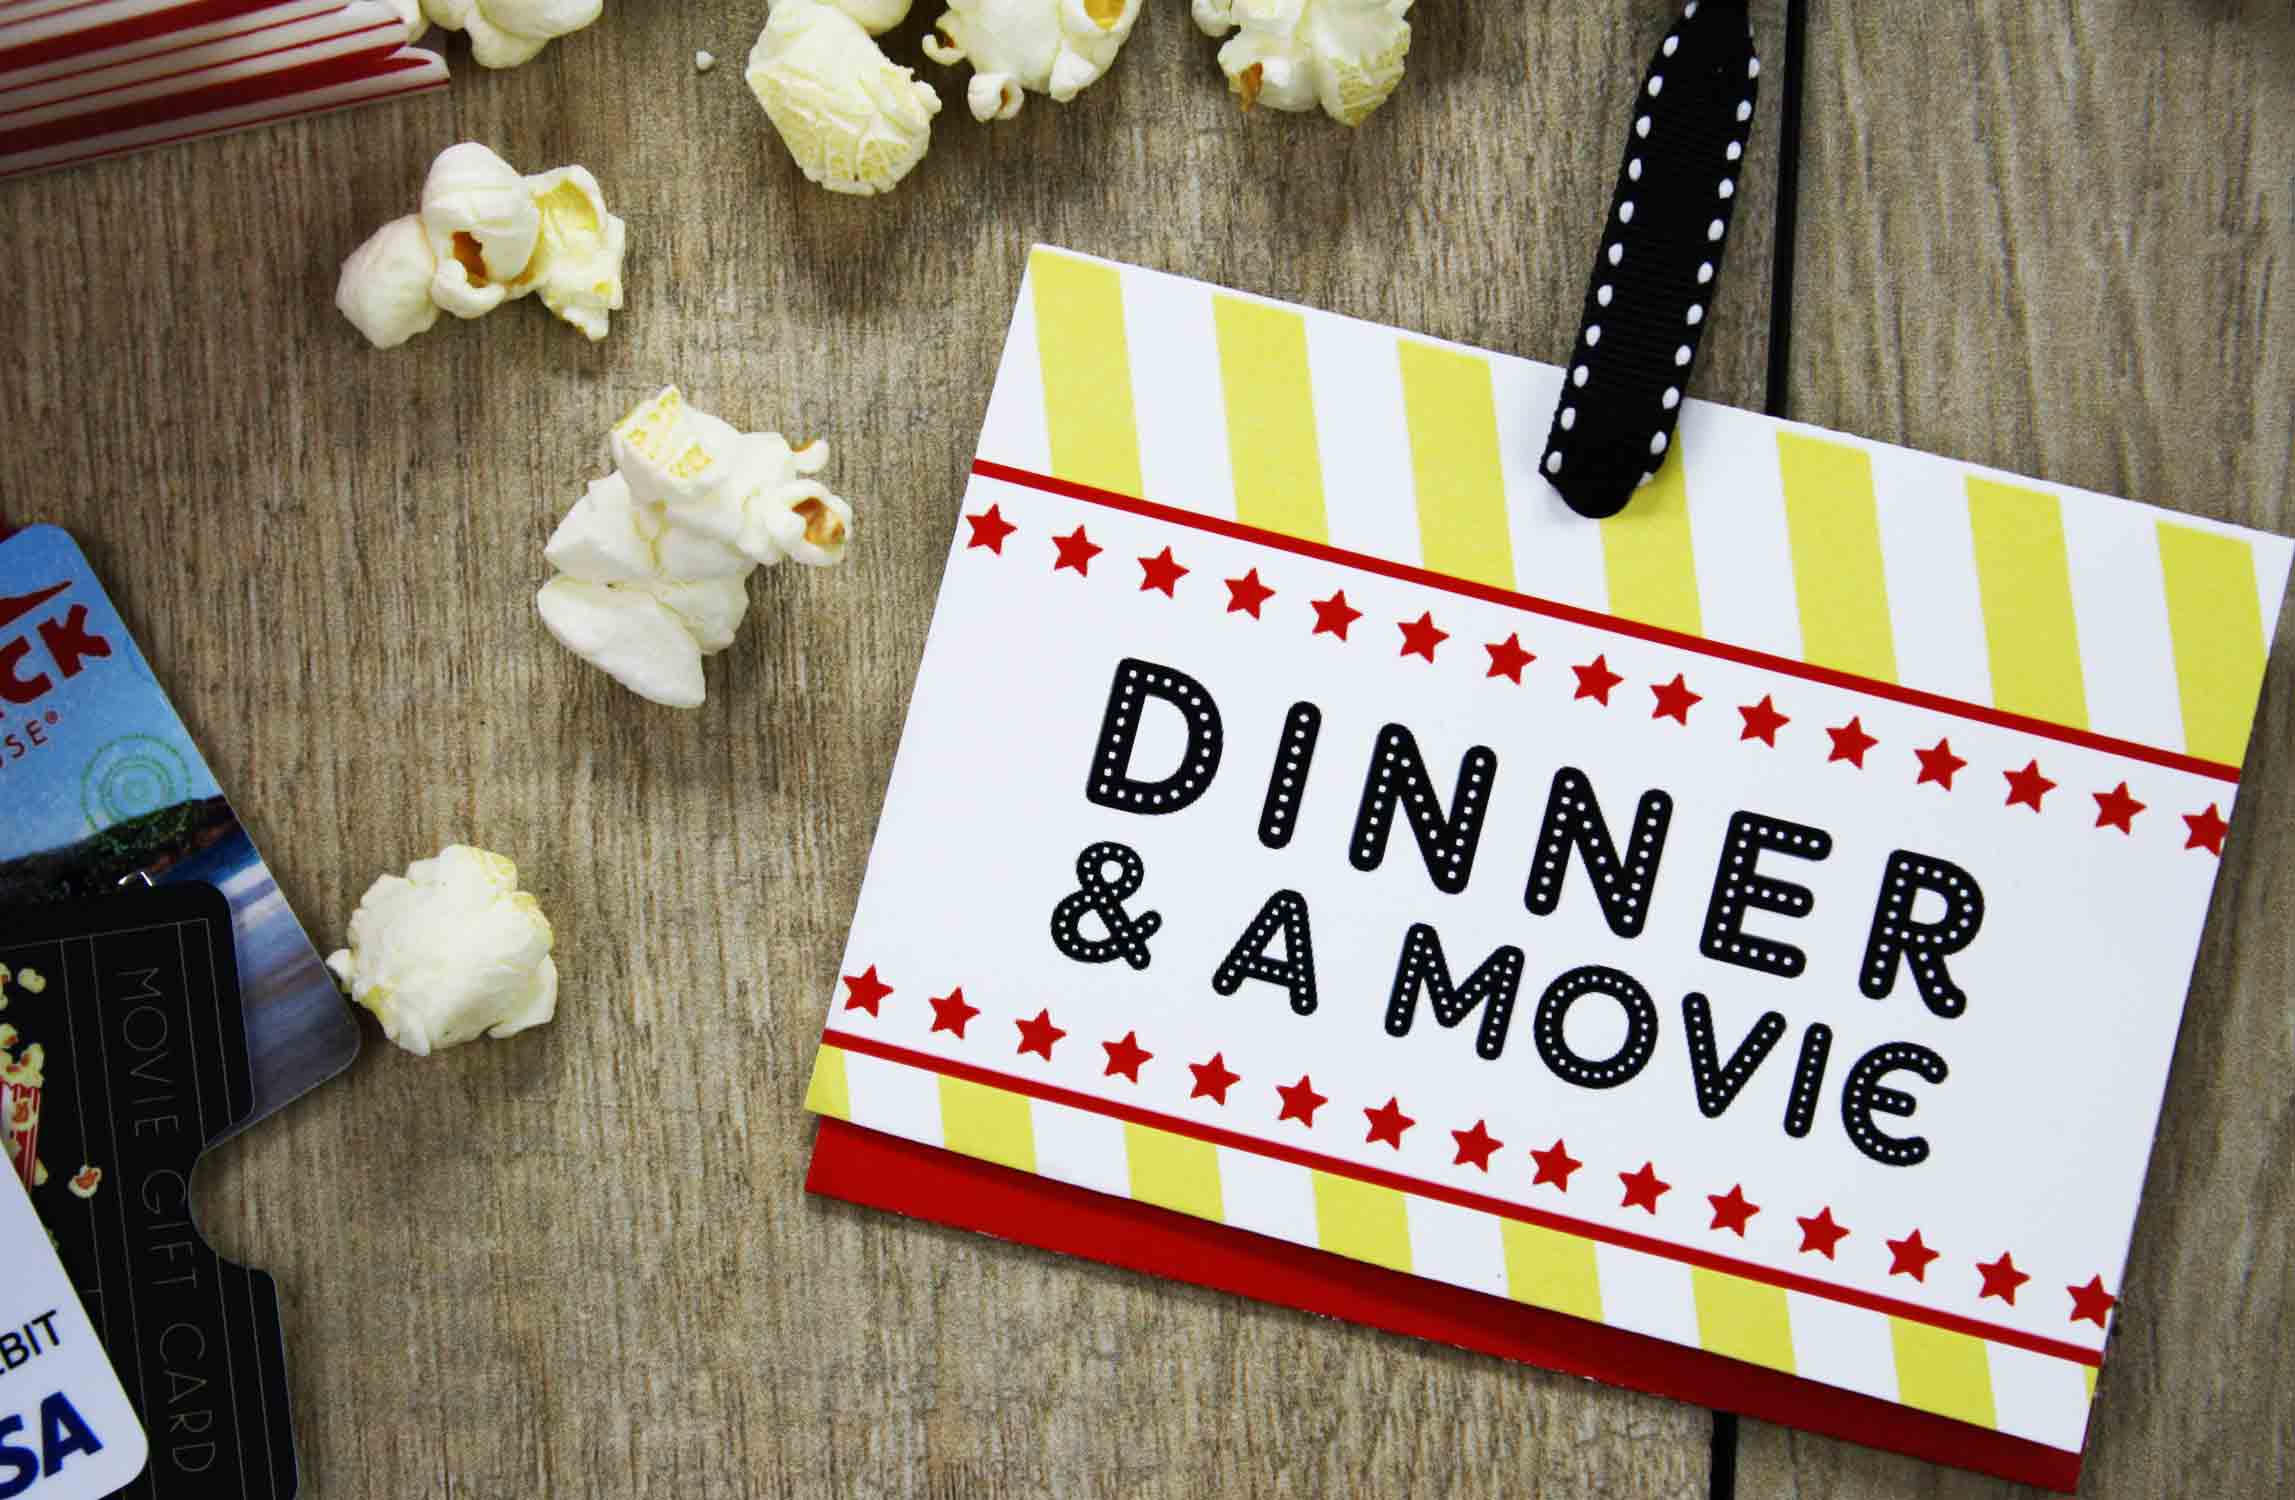 Dinner and Movie Gift Voucher (www.giftcards.com)